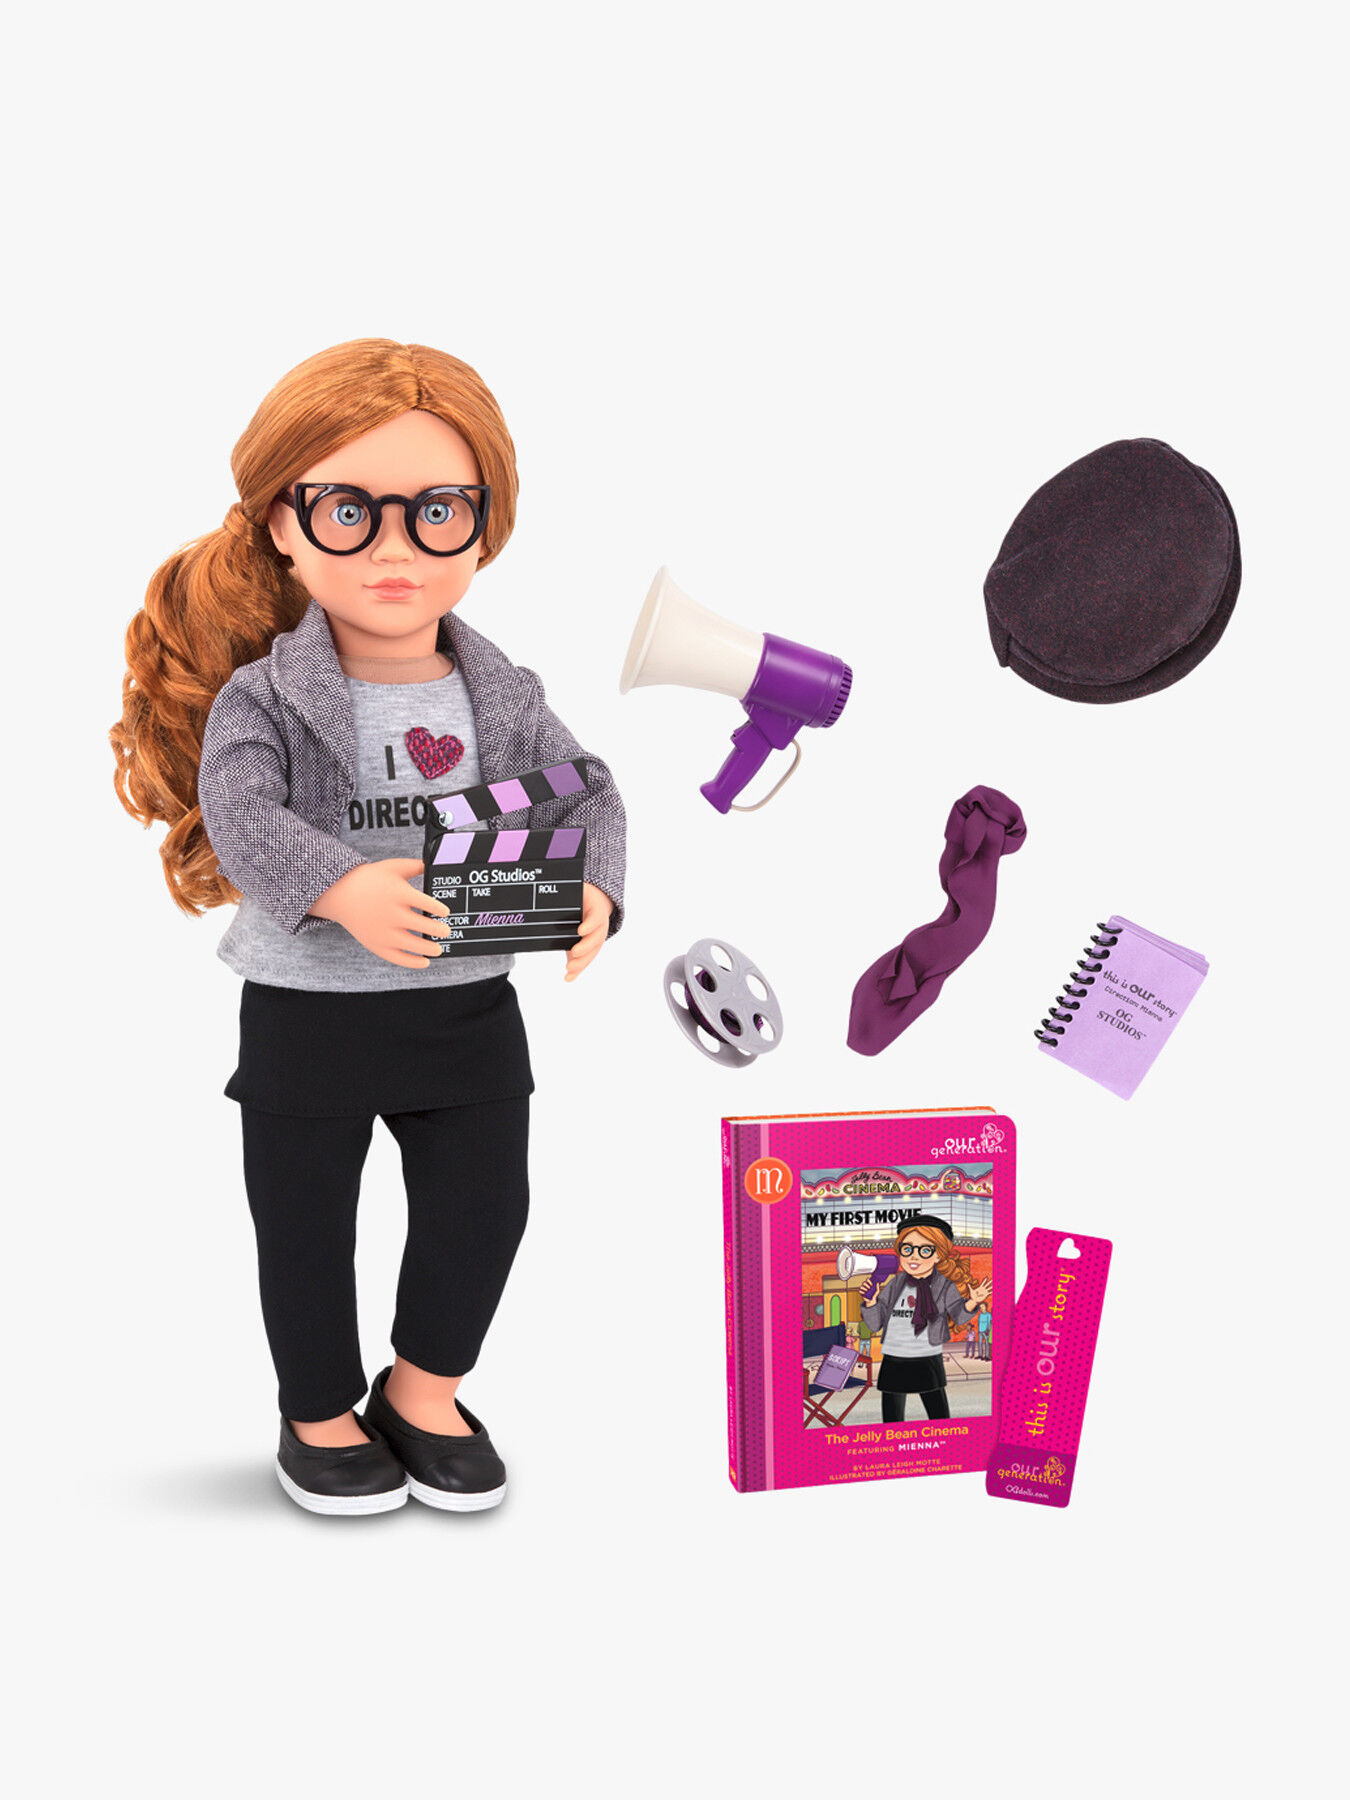 our generation dolls accessories uk